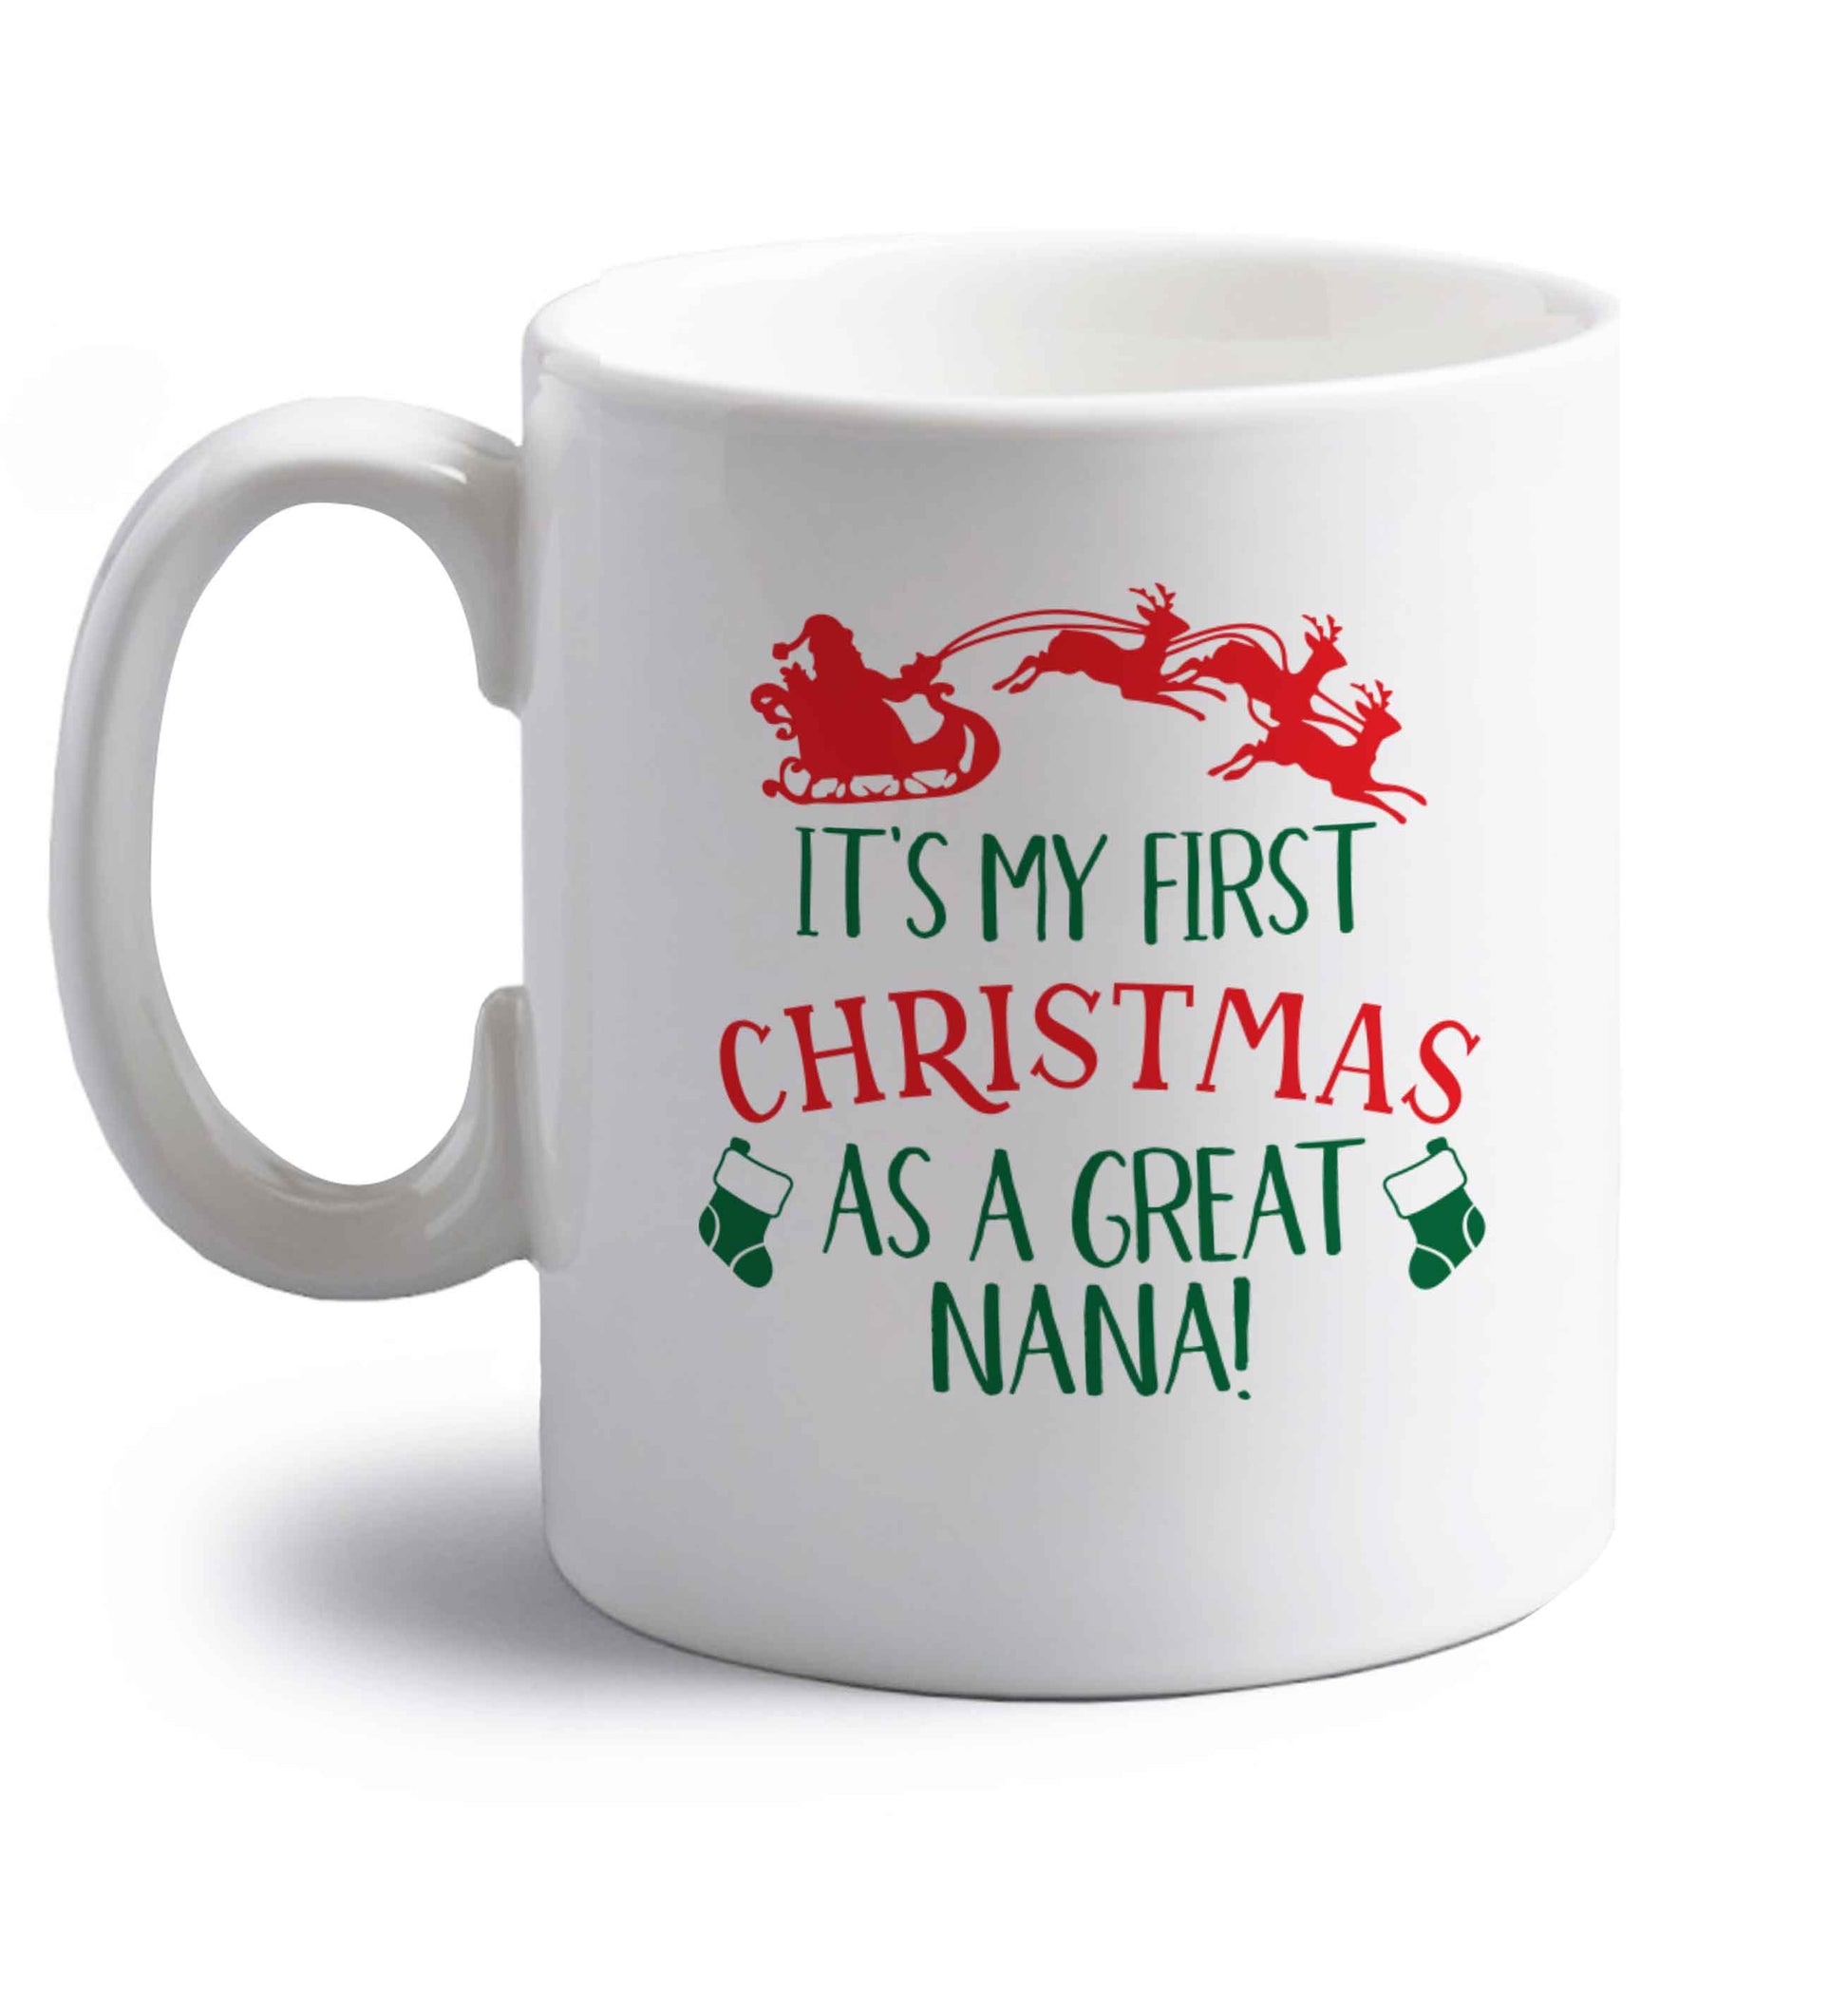 It's my first Christmas as a great nana! right handed white ceramic mug 